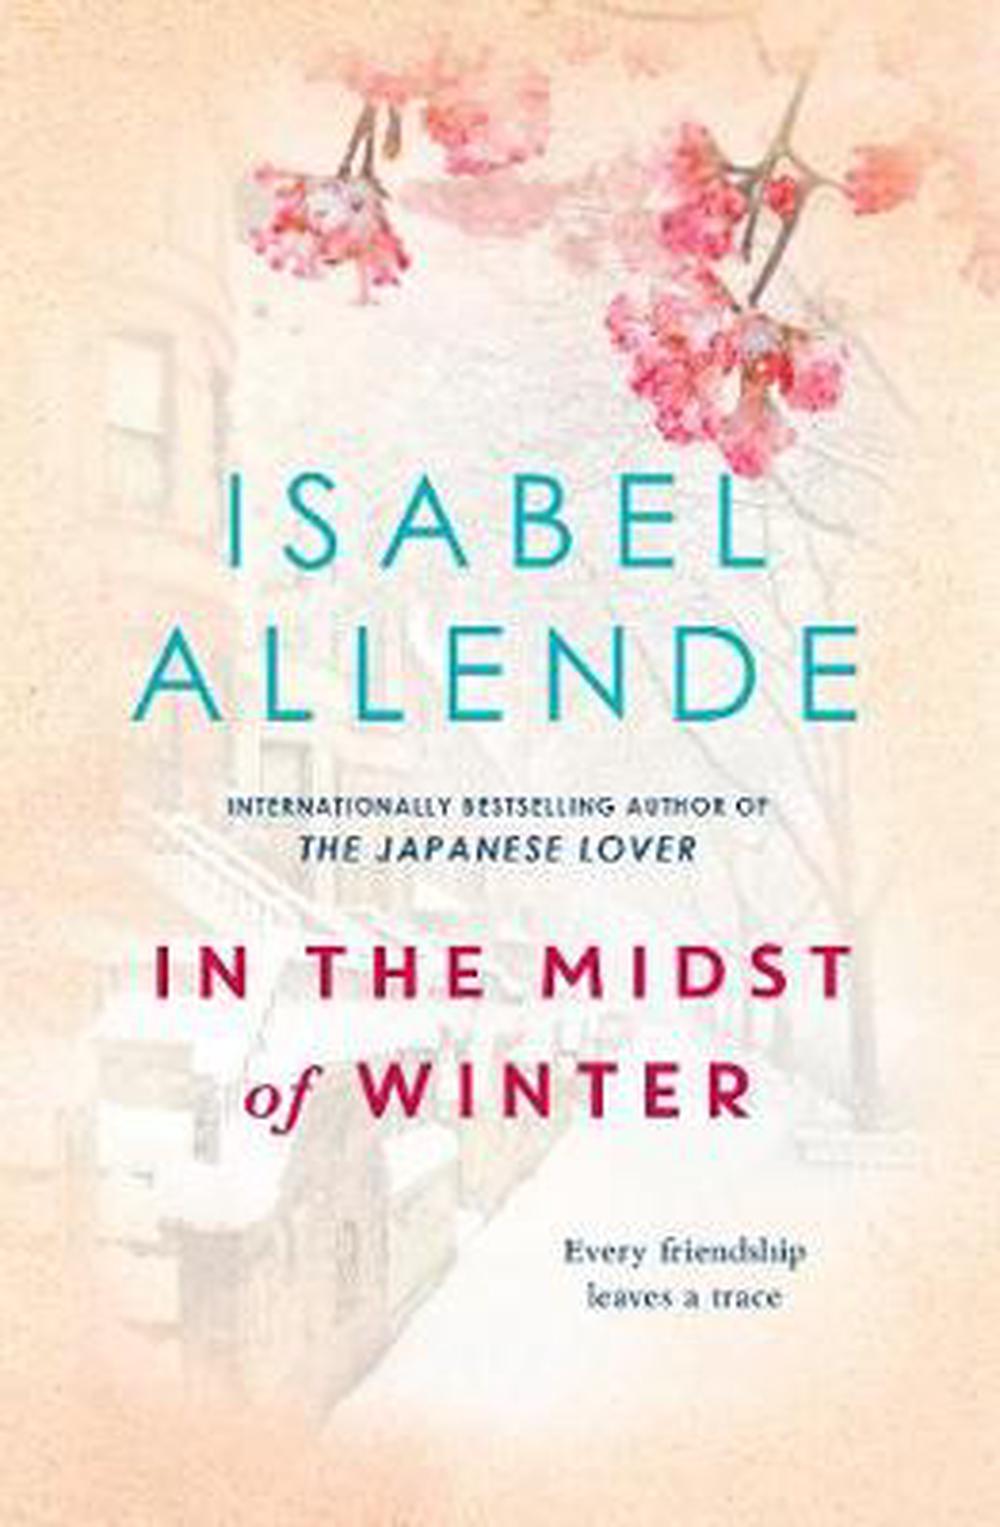 isabel allende in the midst of winter review